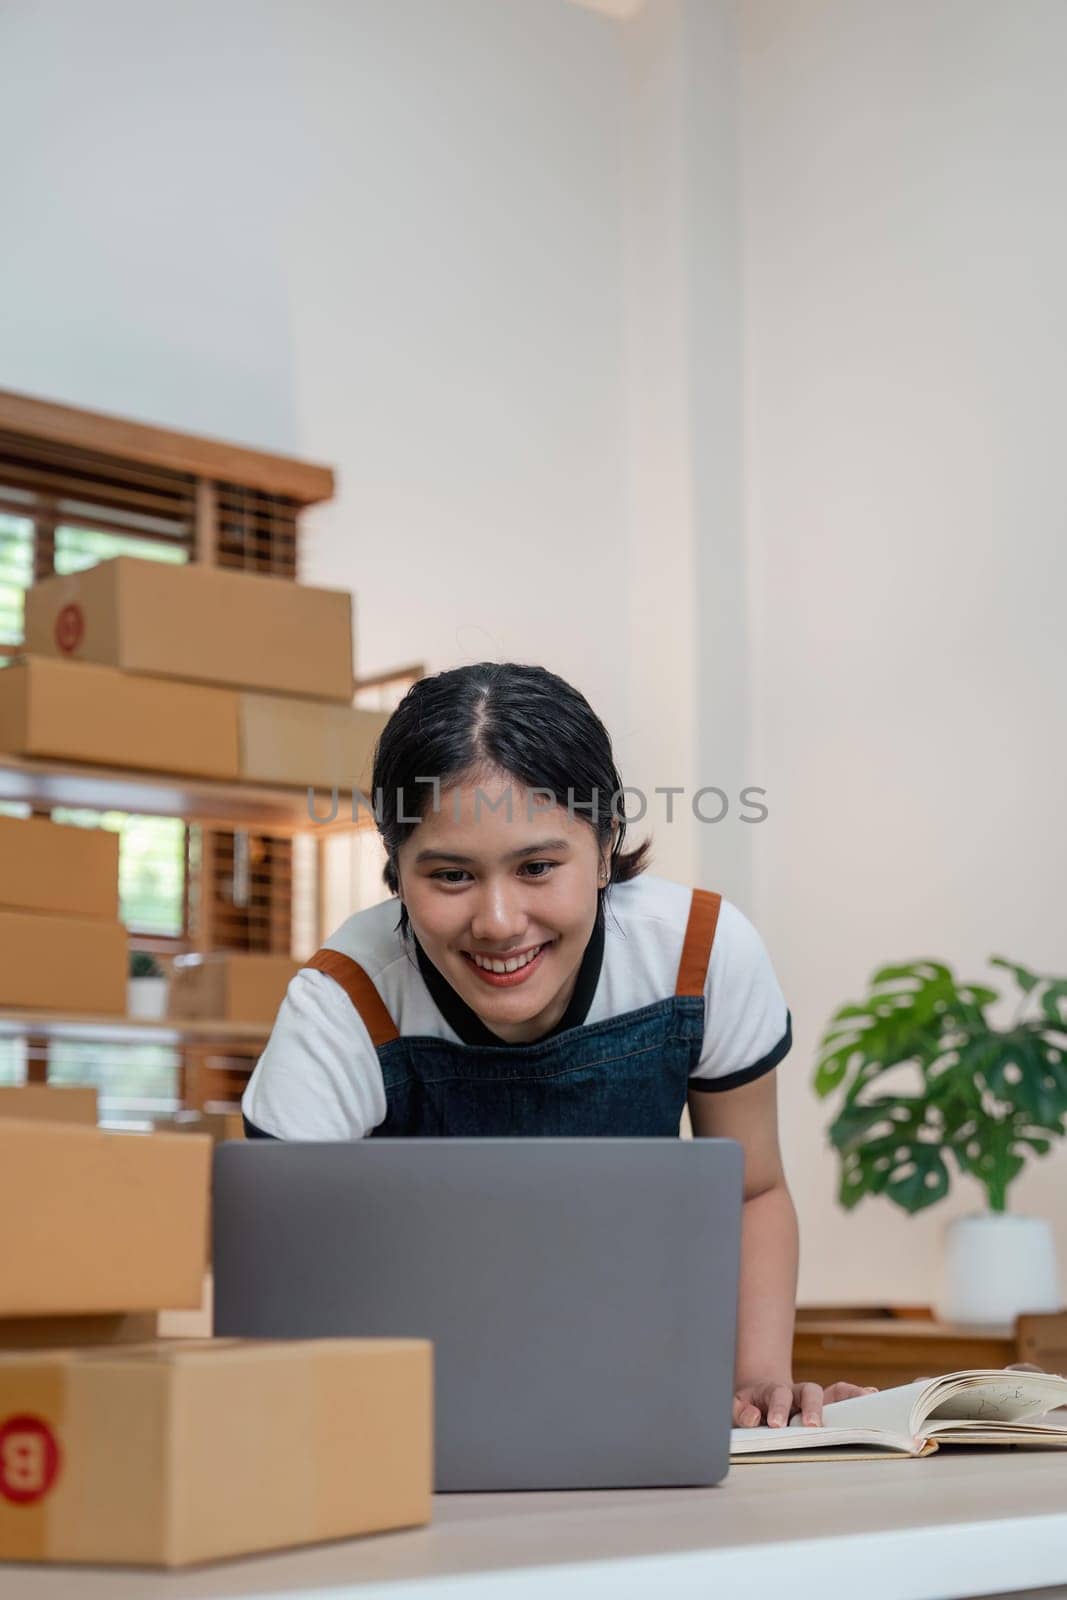 Starting small businesses SME owners female entrepreneurs check online orders to prepare to pack the boxes, sell to customers, business ideas online by nateemee